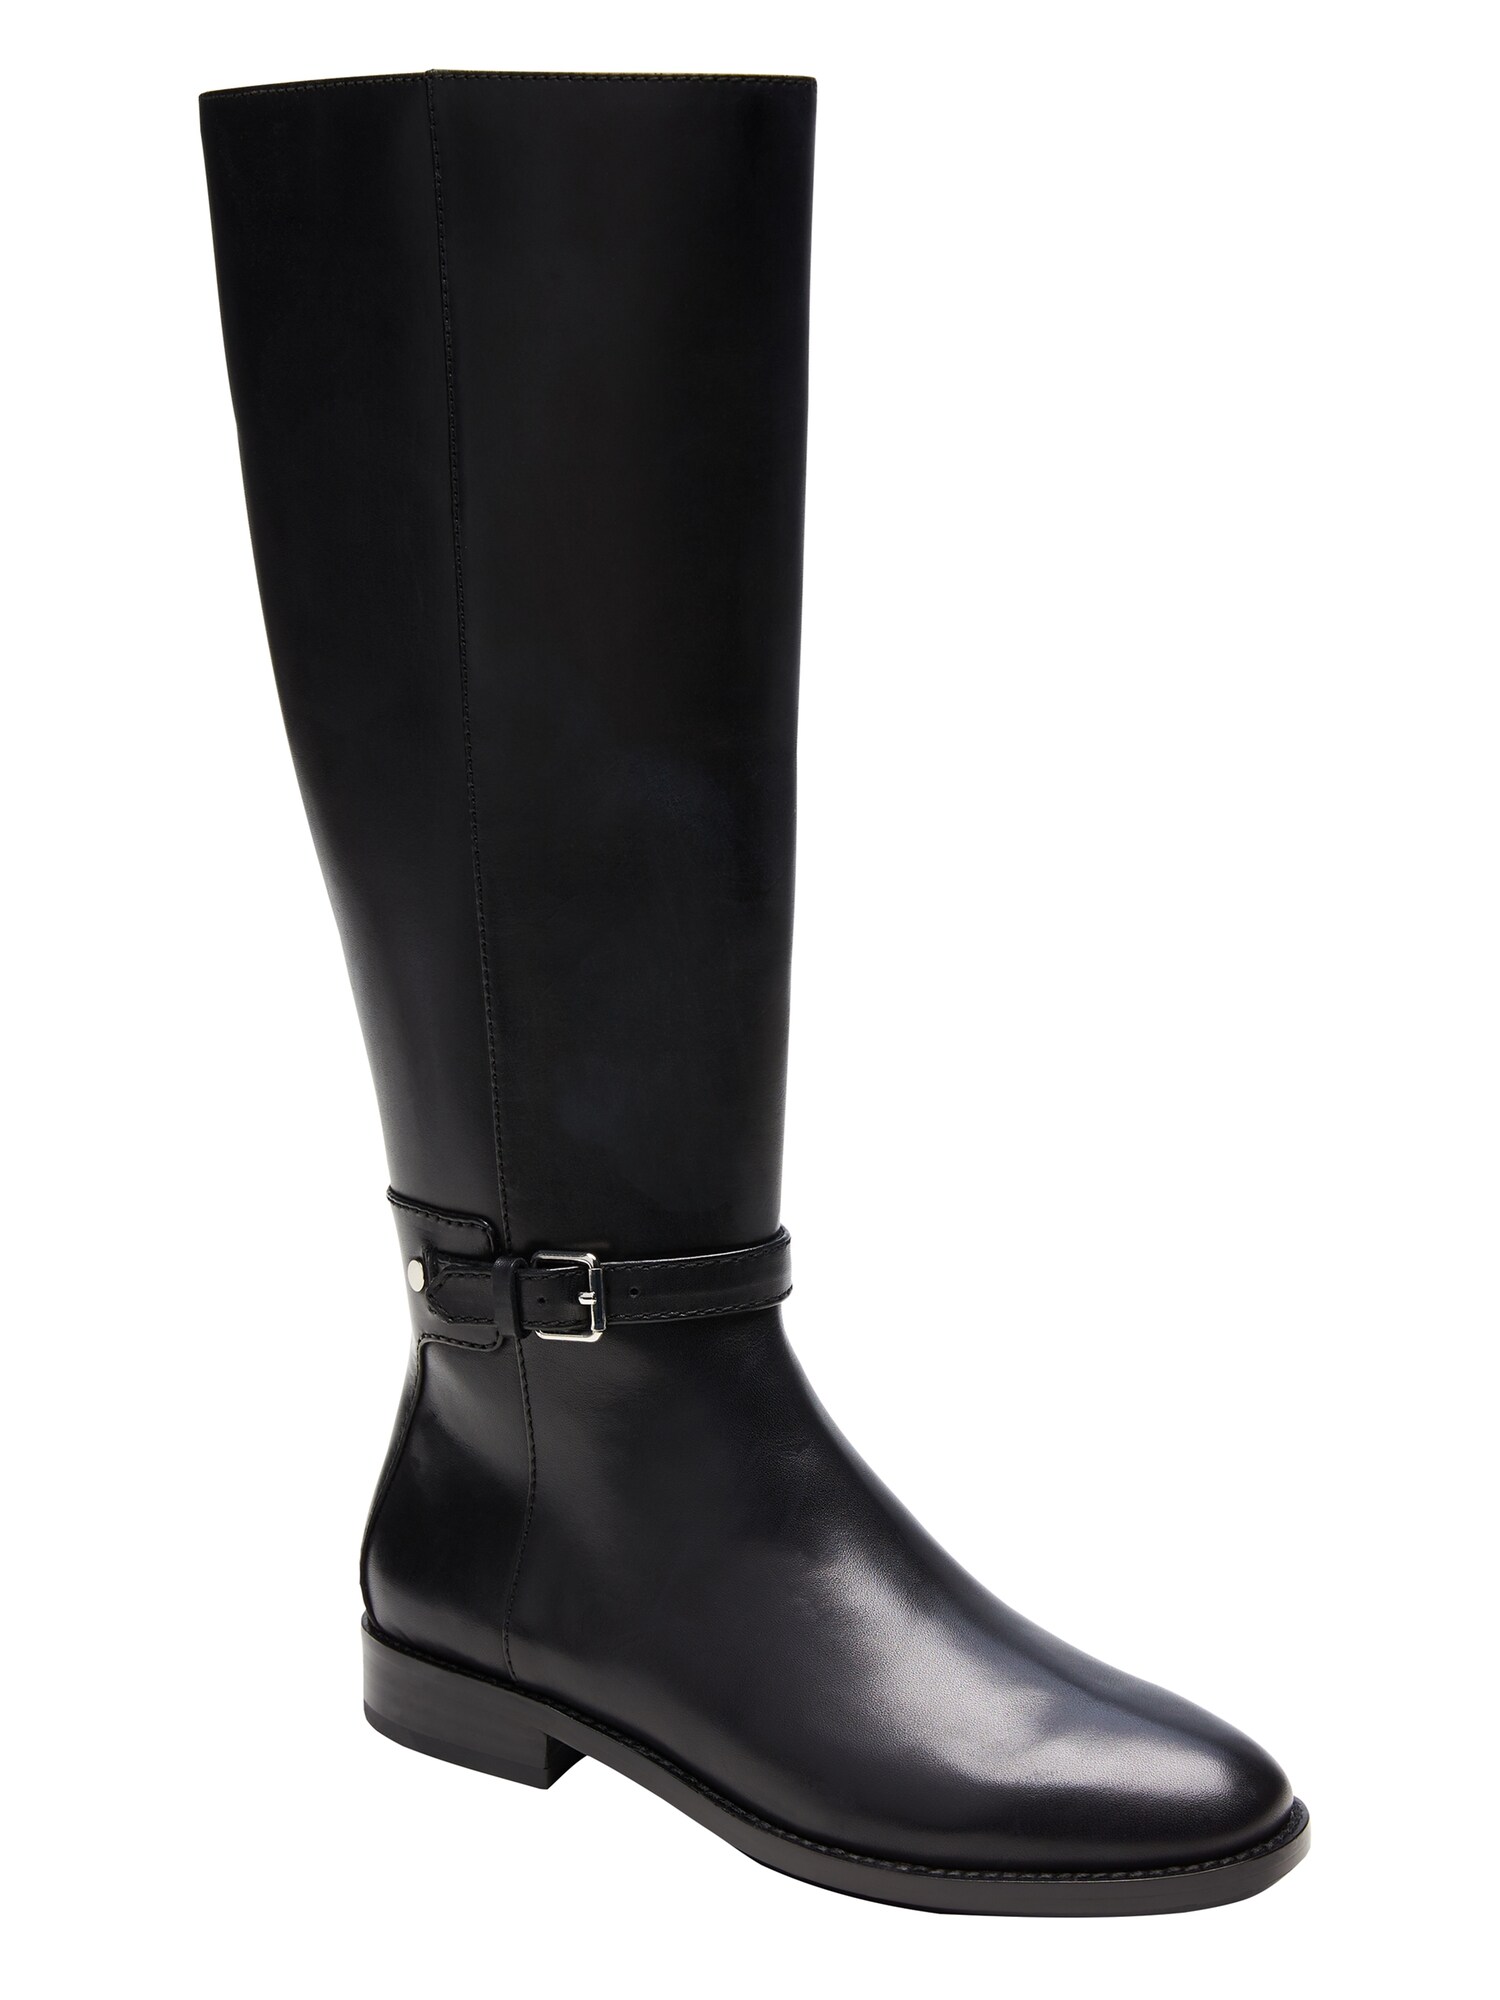 black riding boots leather